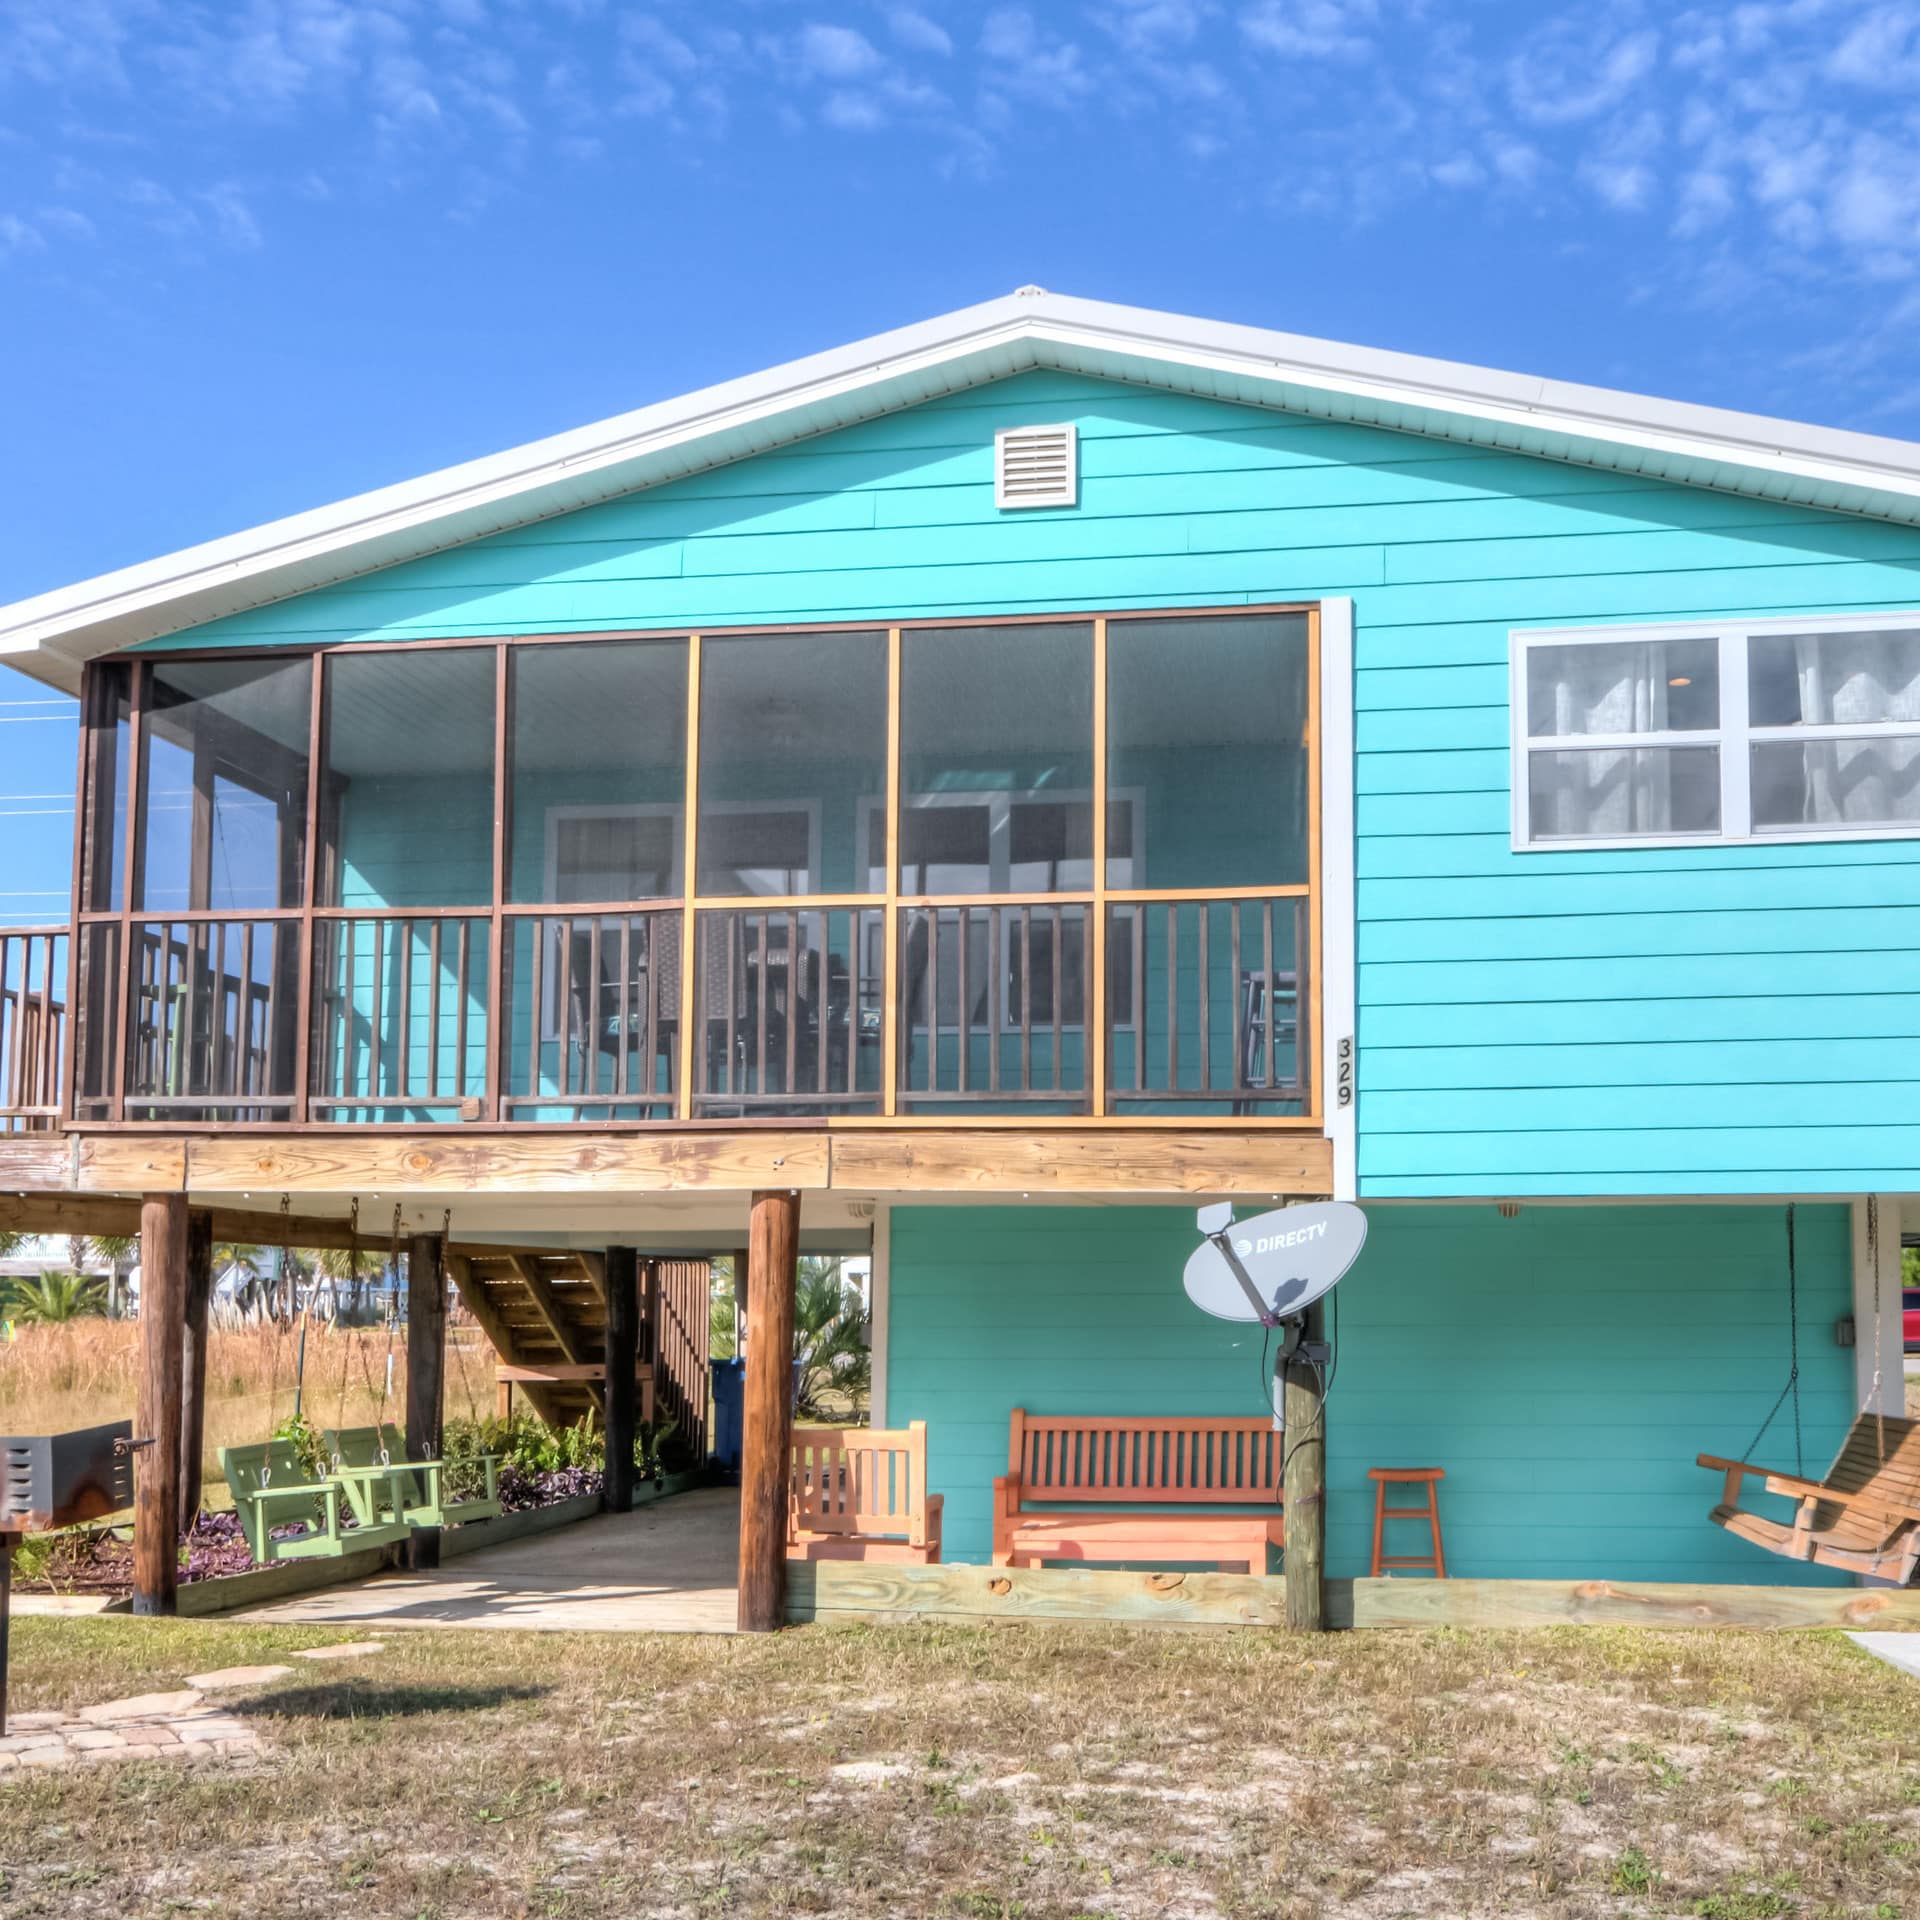 a vibrant turquoise home on stilts by Gulf Shores' beach